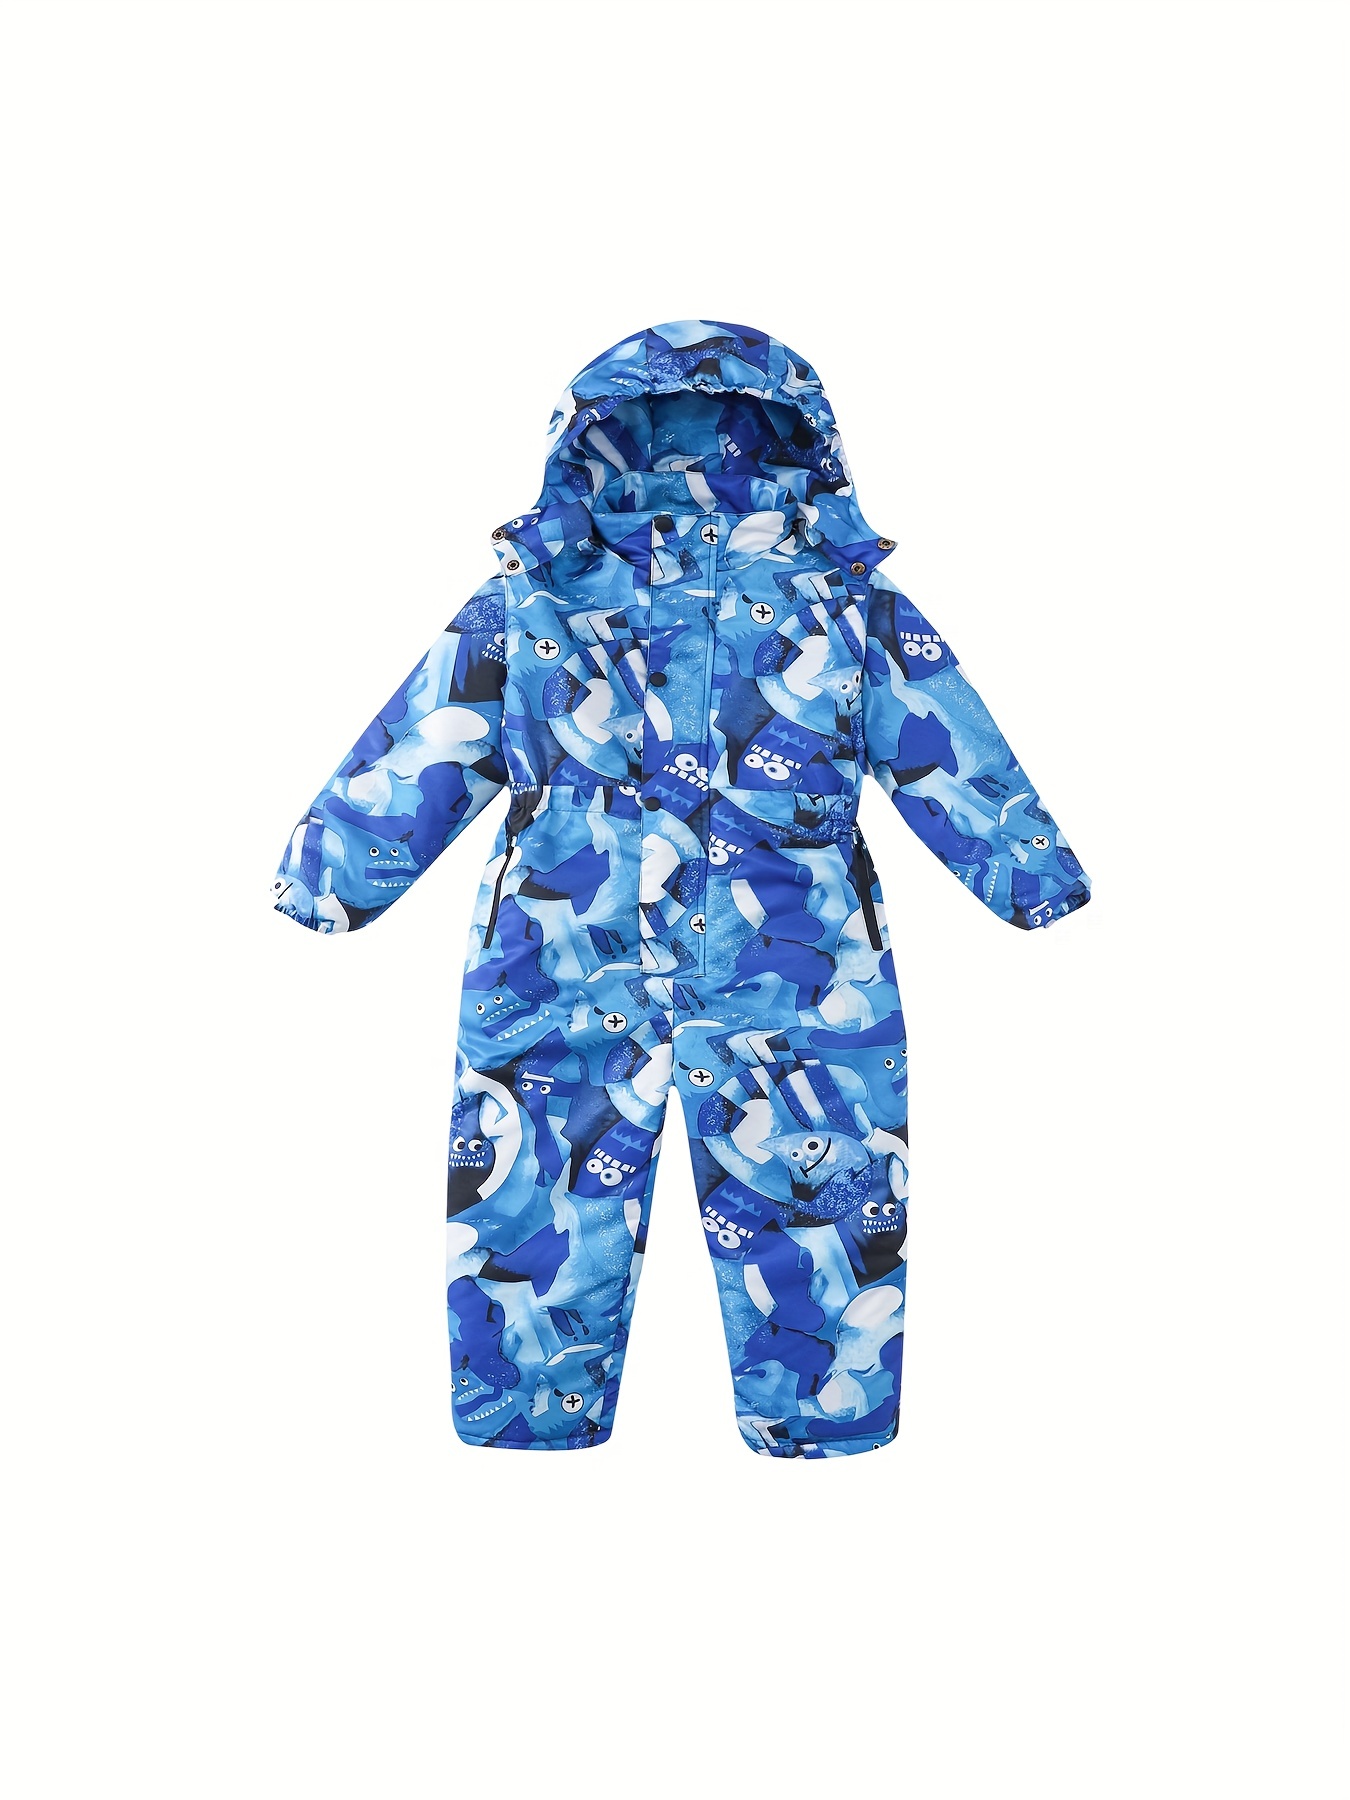 Lightweight Kids Toddler Boys Girls Rain Suit Baby Waterproof Coveralls -  China Kid Overall and Kid Coverall price